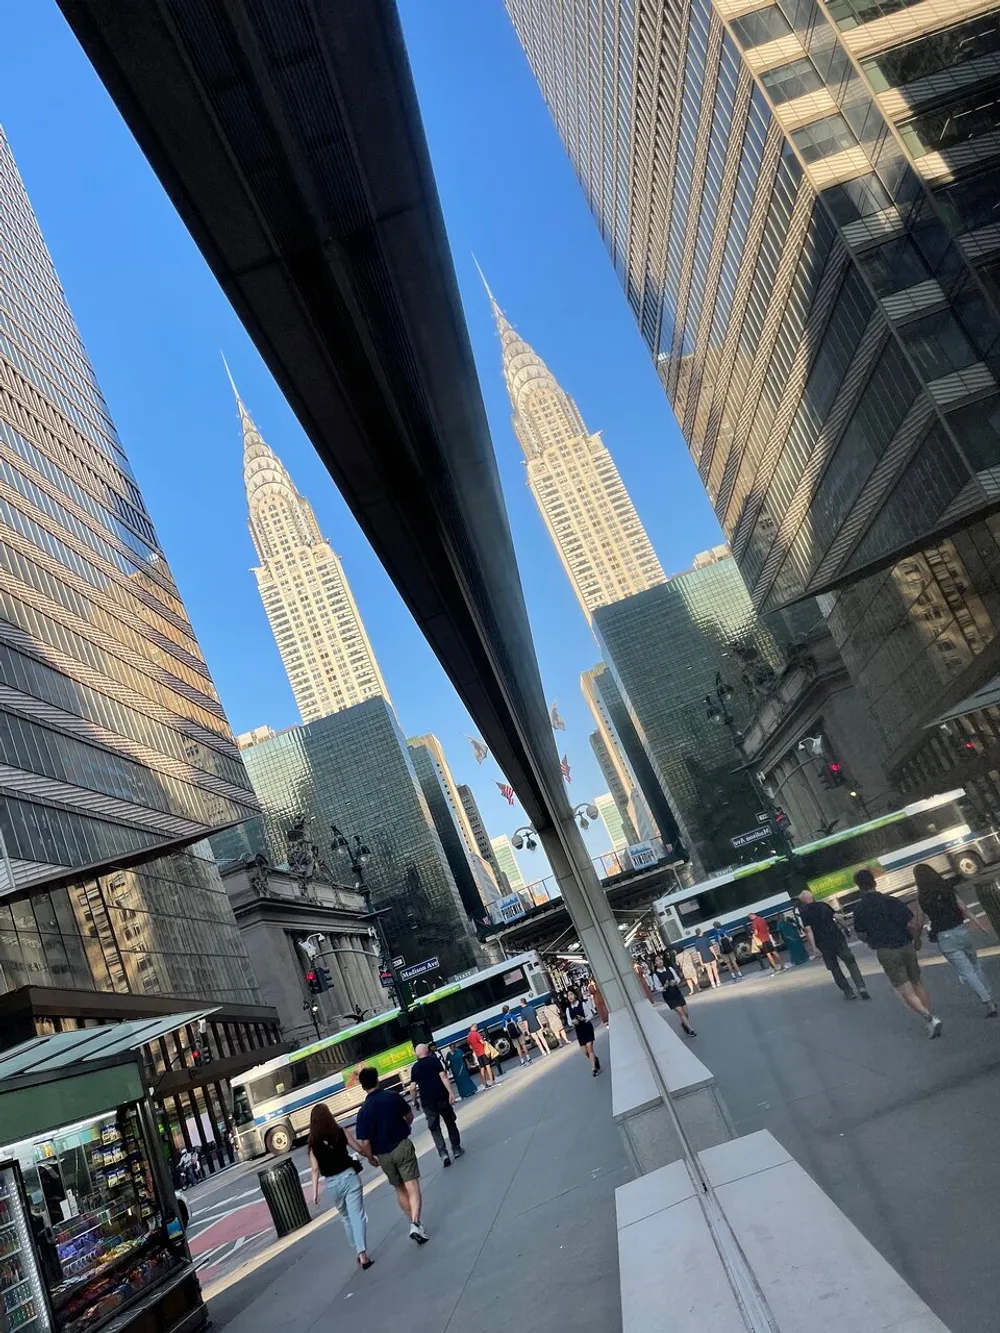 The image captures a bustling city street with pedestrians showcasing a reflective building surface that creates a mirrored illusion of the distinctive Chrysler Building against a clear blue sky